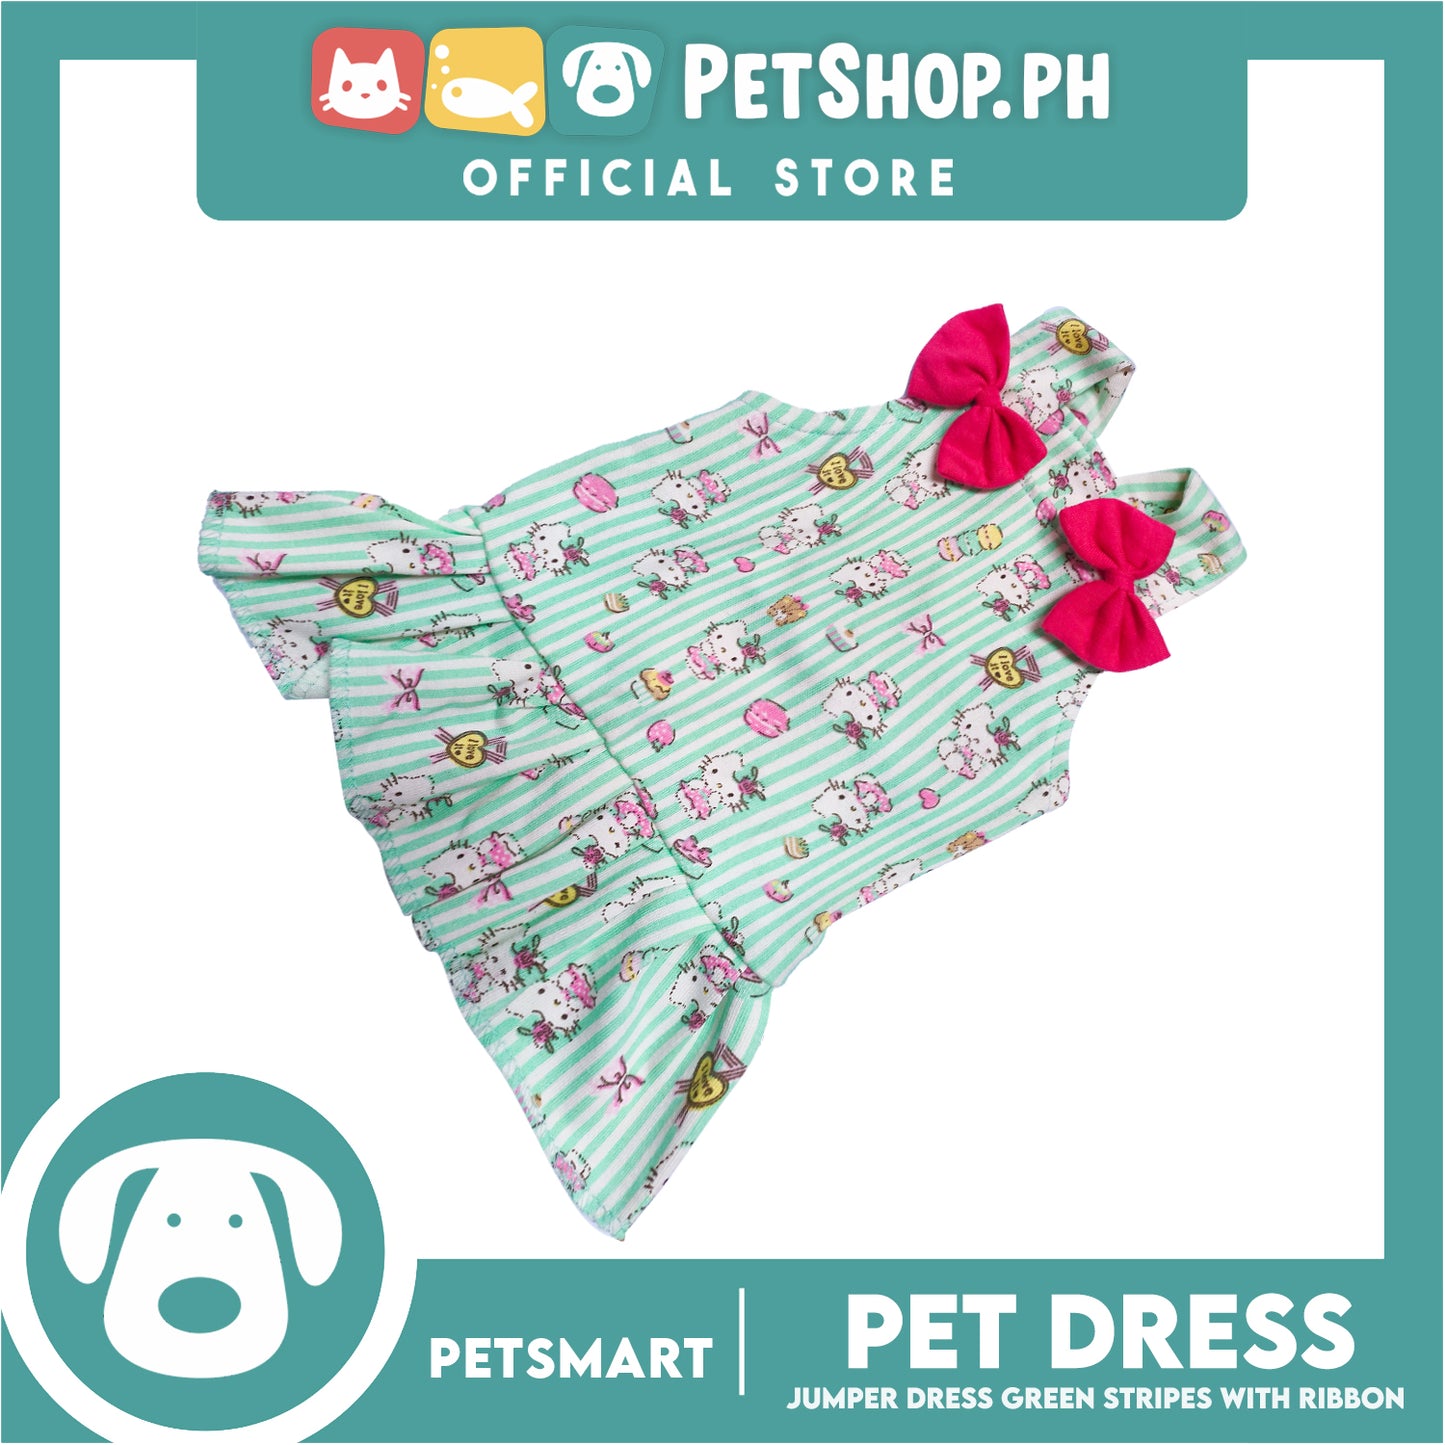 Pet Dress With Character Design, Green Stripes With Pink Ribbon (Medium) Perfect Fit For Dogs And Cats, Breathable Dress, Soft Lightweight Pet Clothing